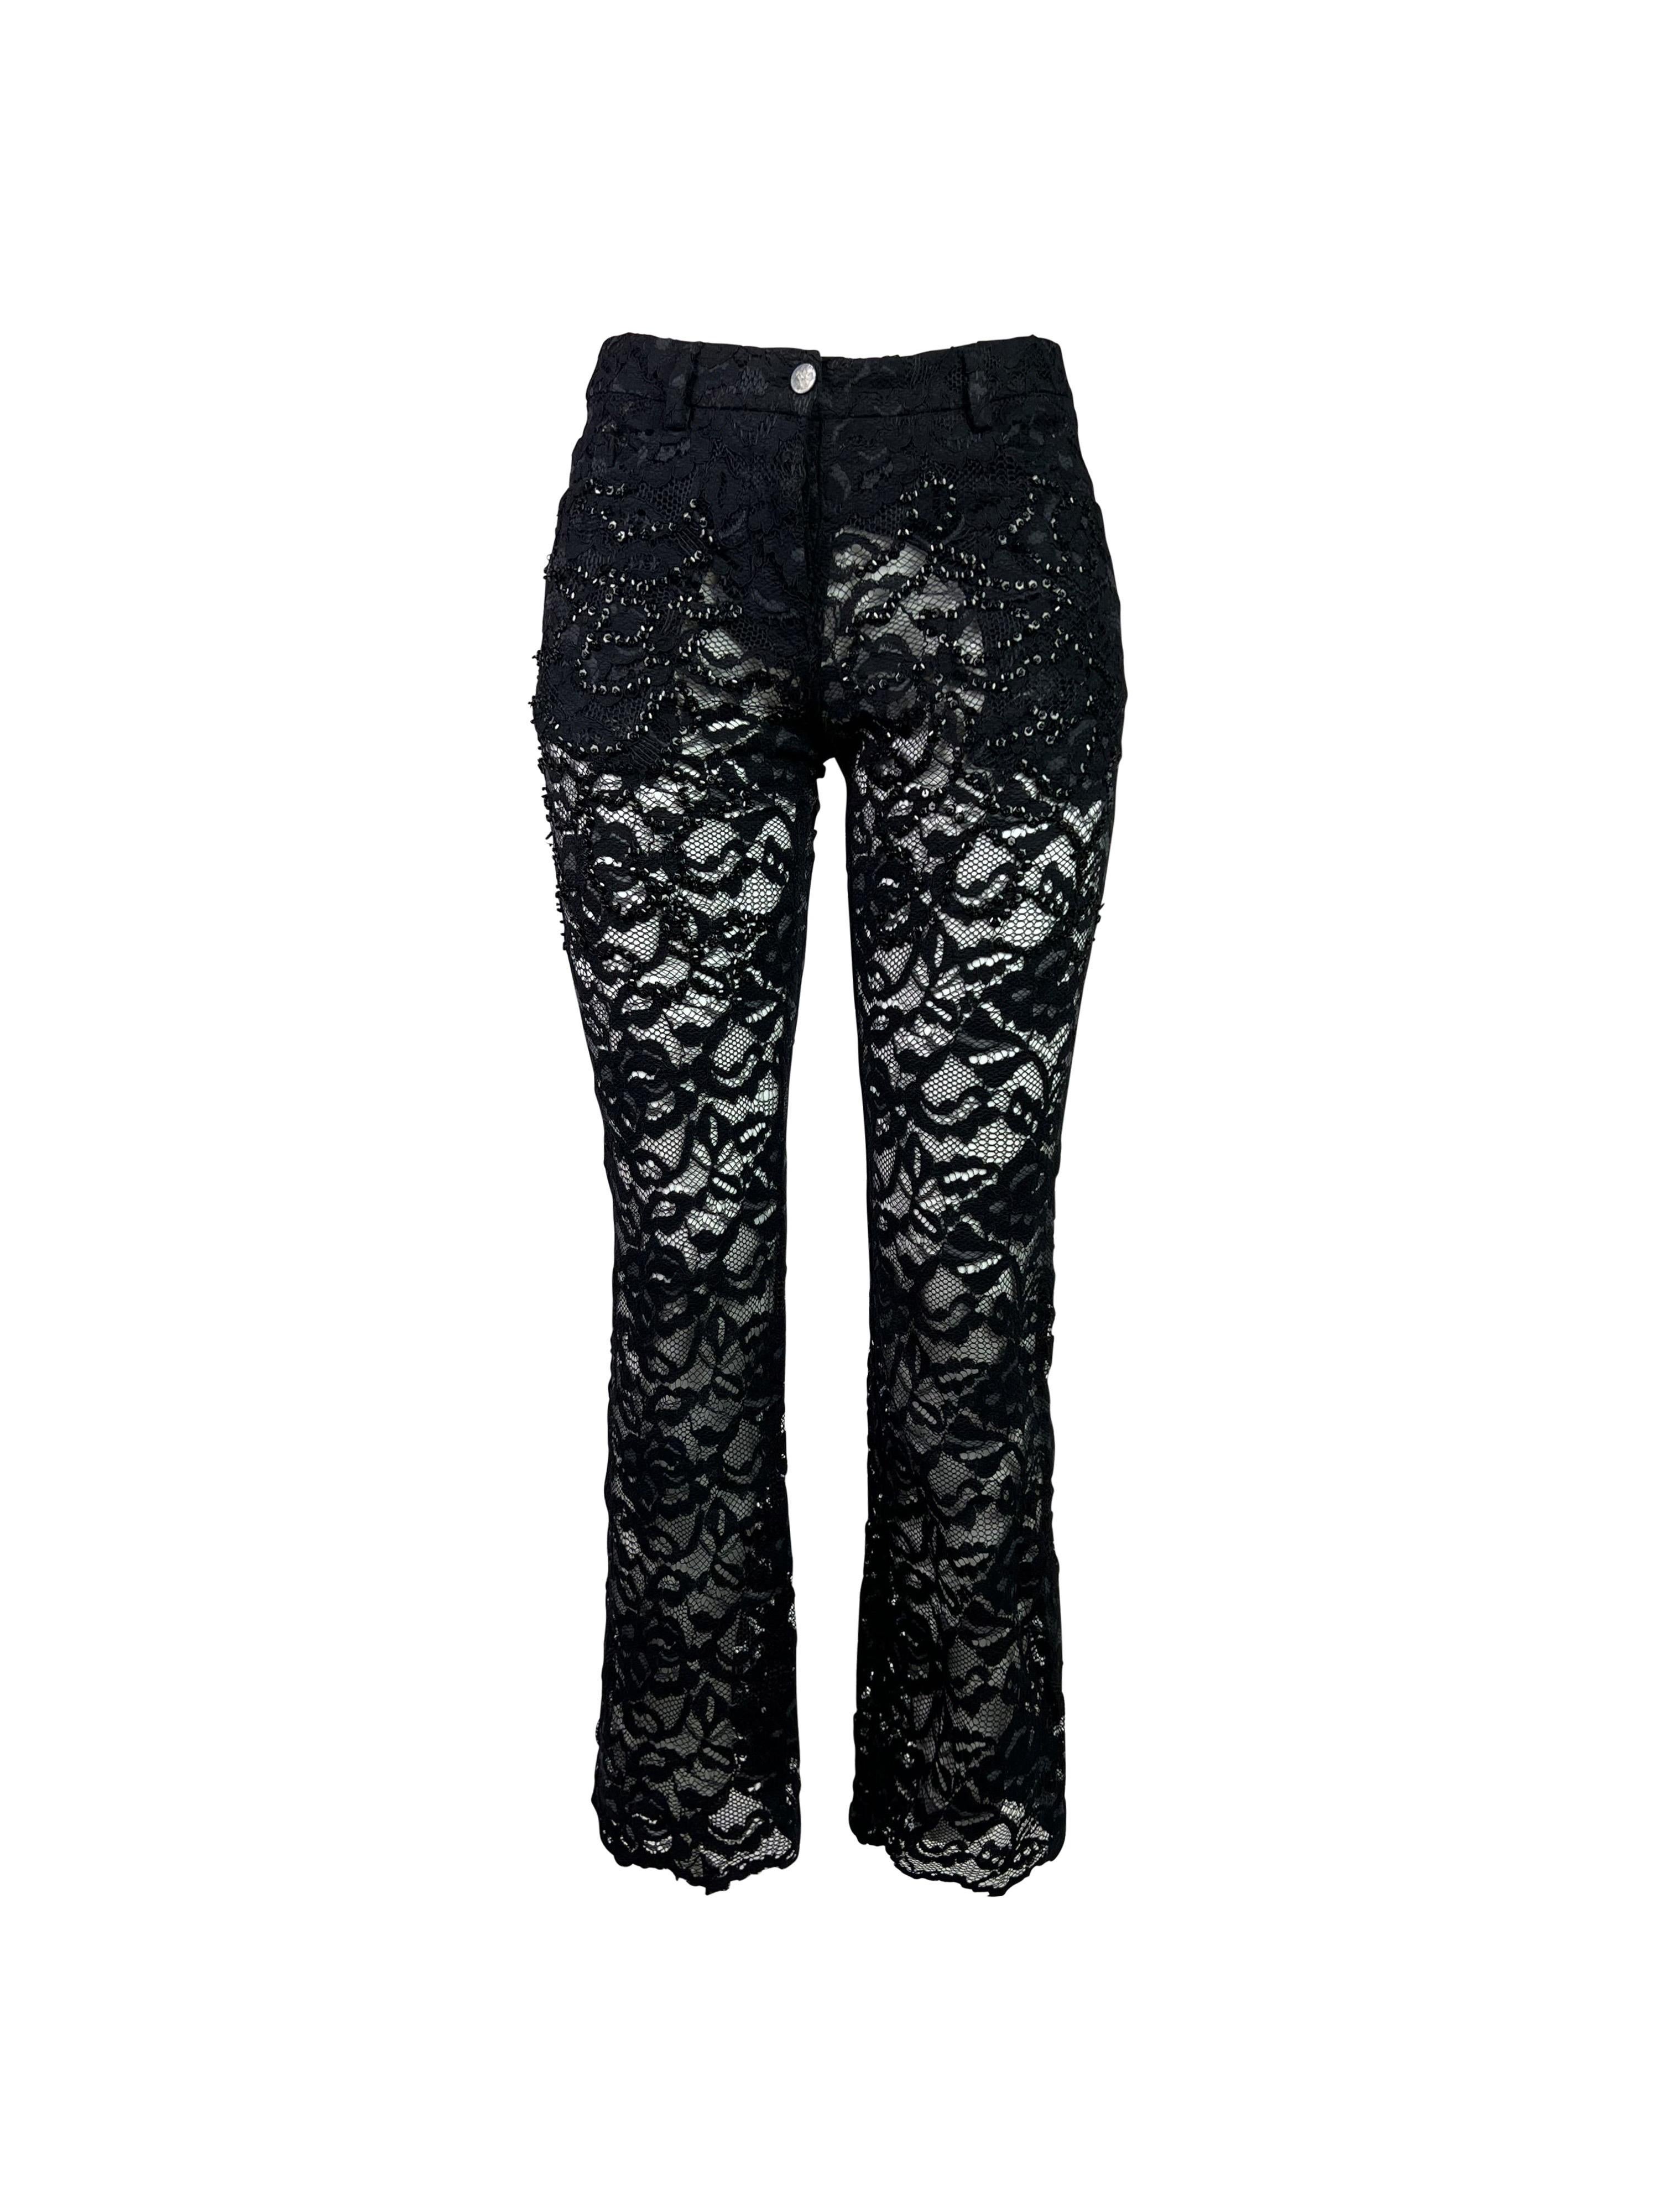 Black SS 1999 Alexander McQueen Lace Trousers